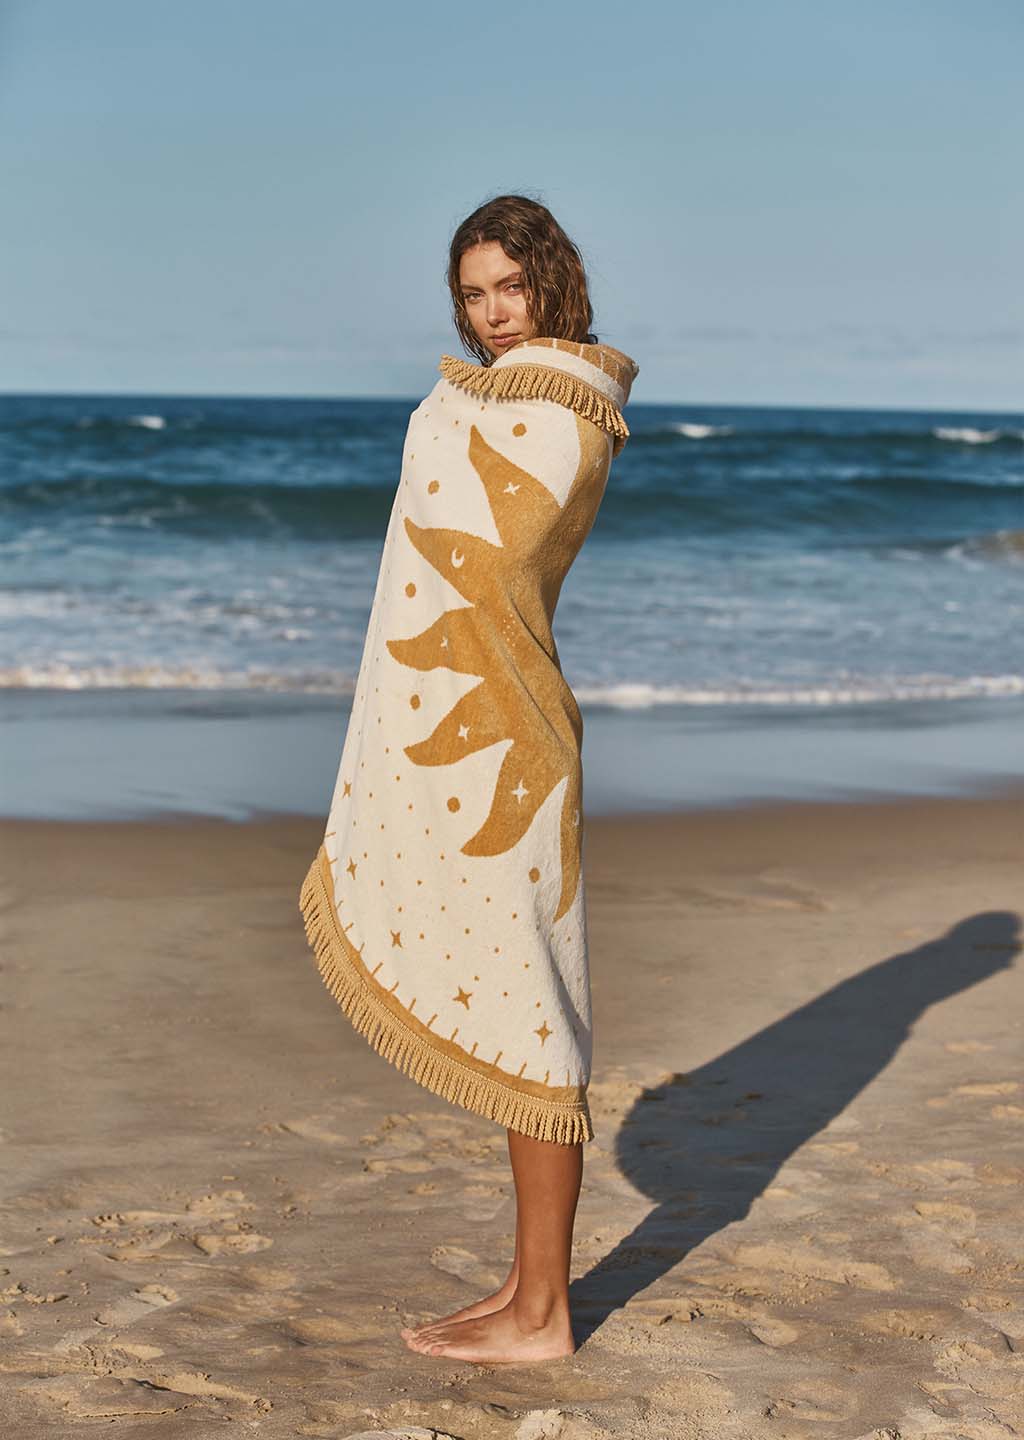 The Beach People Lune Round Beach Towel wrapped around a woman on the beach